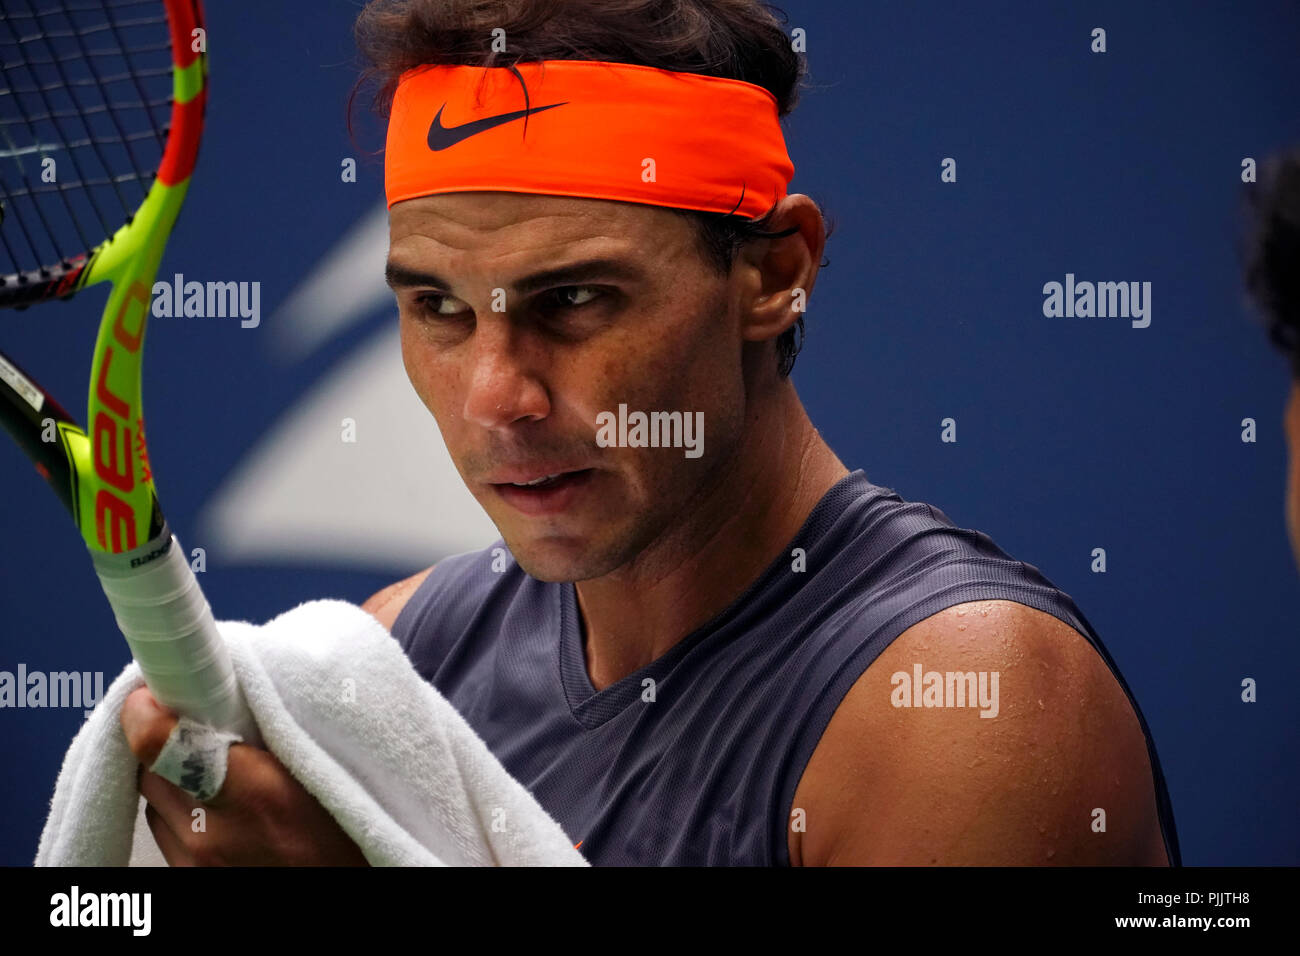 New York, USA. 7th September 2018. US Open Tennis: Spain's Rafael Nadal  toweling off during his semifinal match against Argentina's Juan Martin del  Potro at the US Open in Flushing Meadows, New